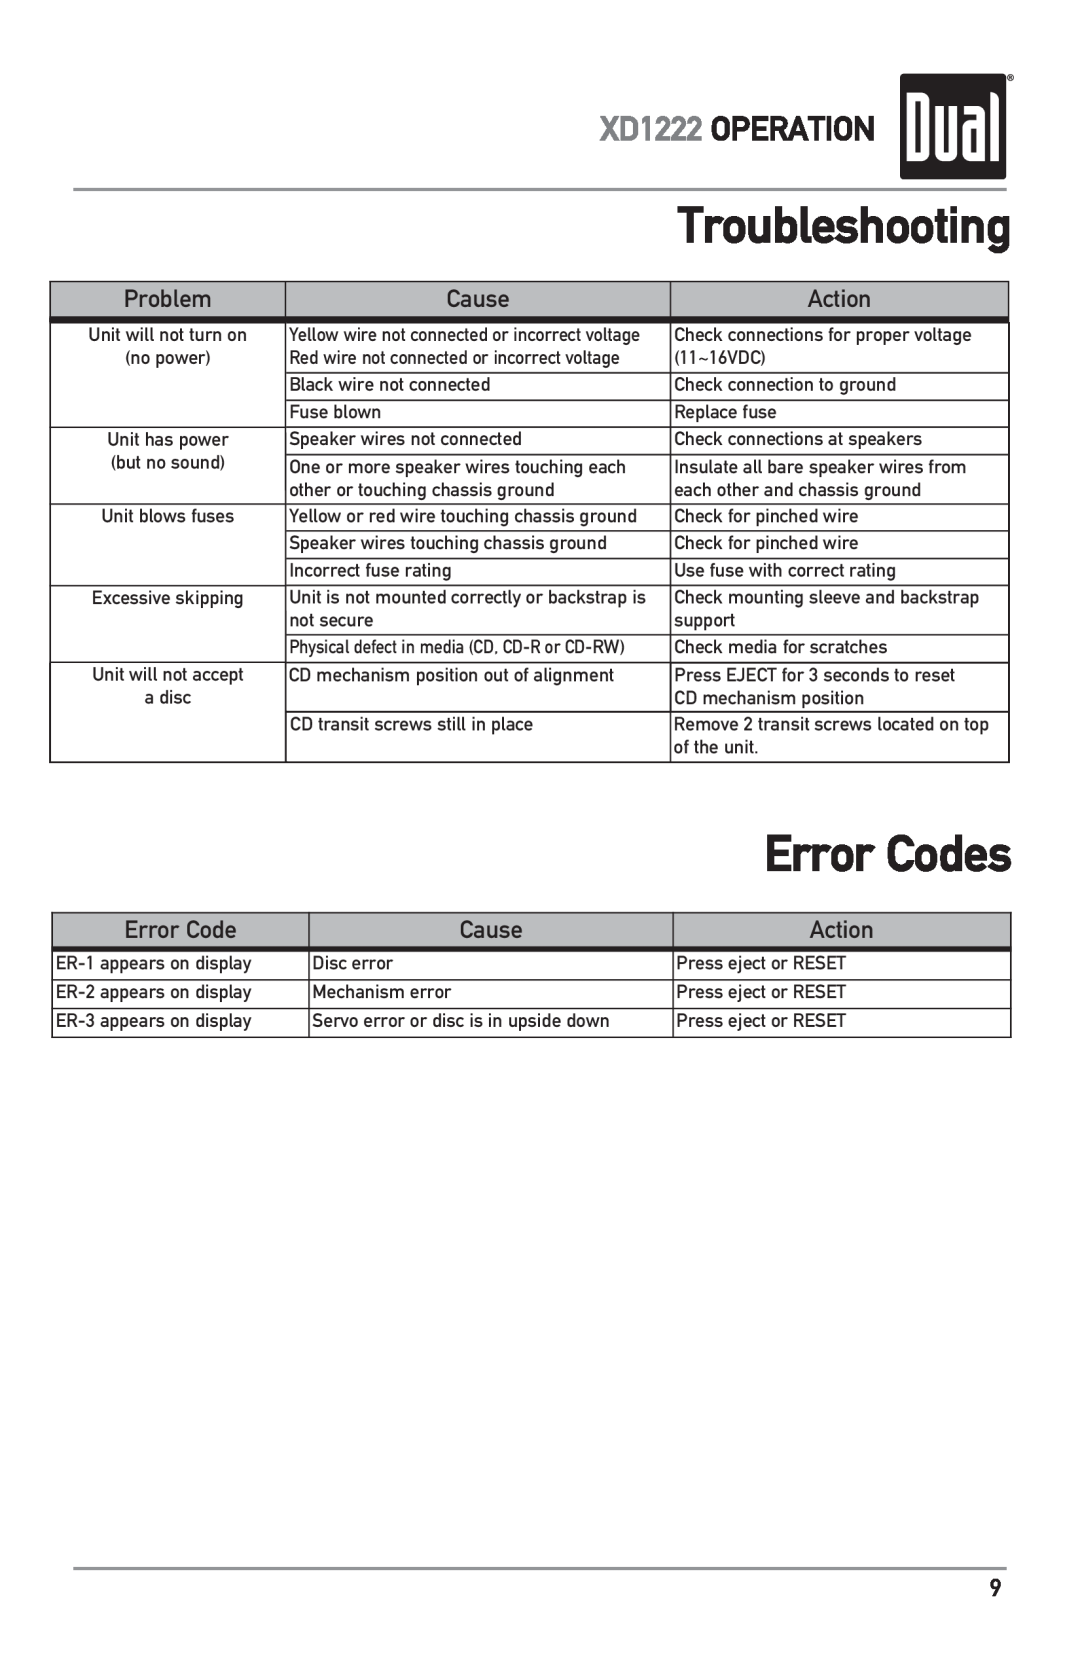 Dual owner manual Troubleshooting, Error Codes, XD1222 OPERATION 